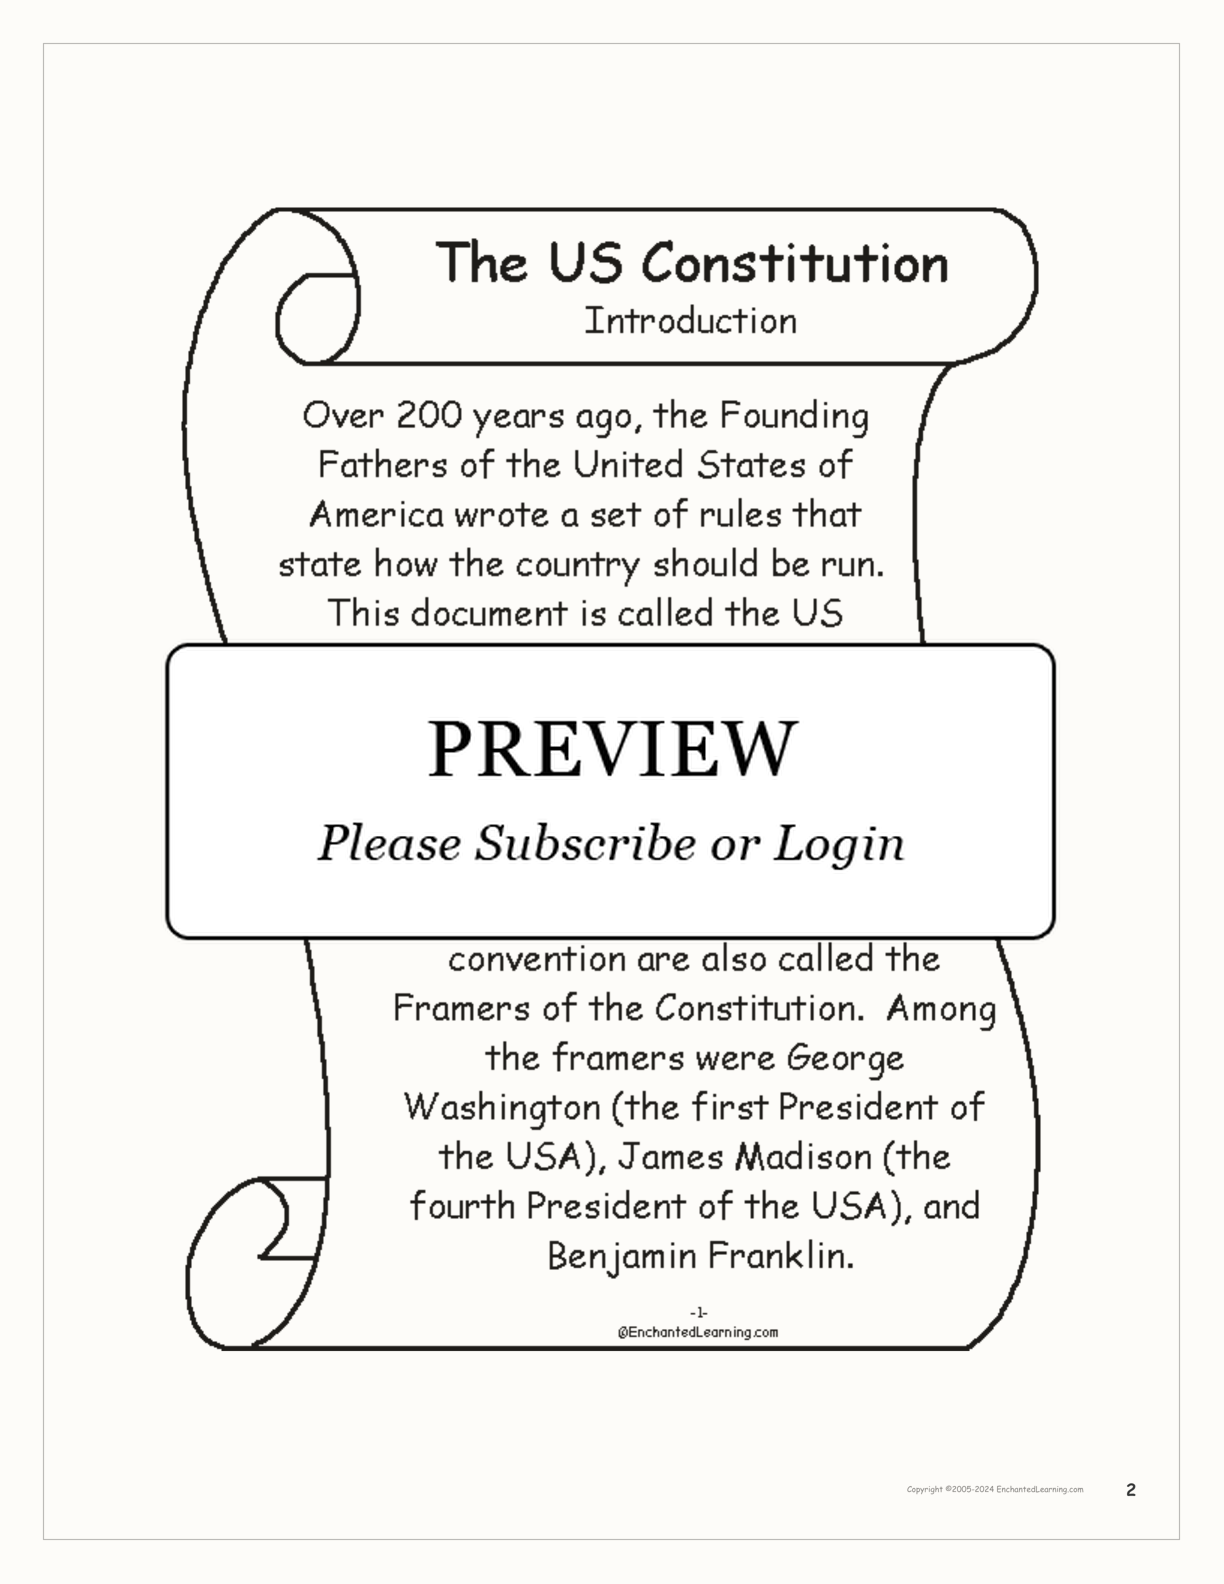 US Constitution Book interactive printout page 2